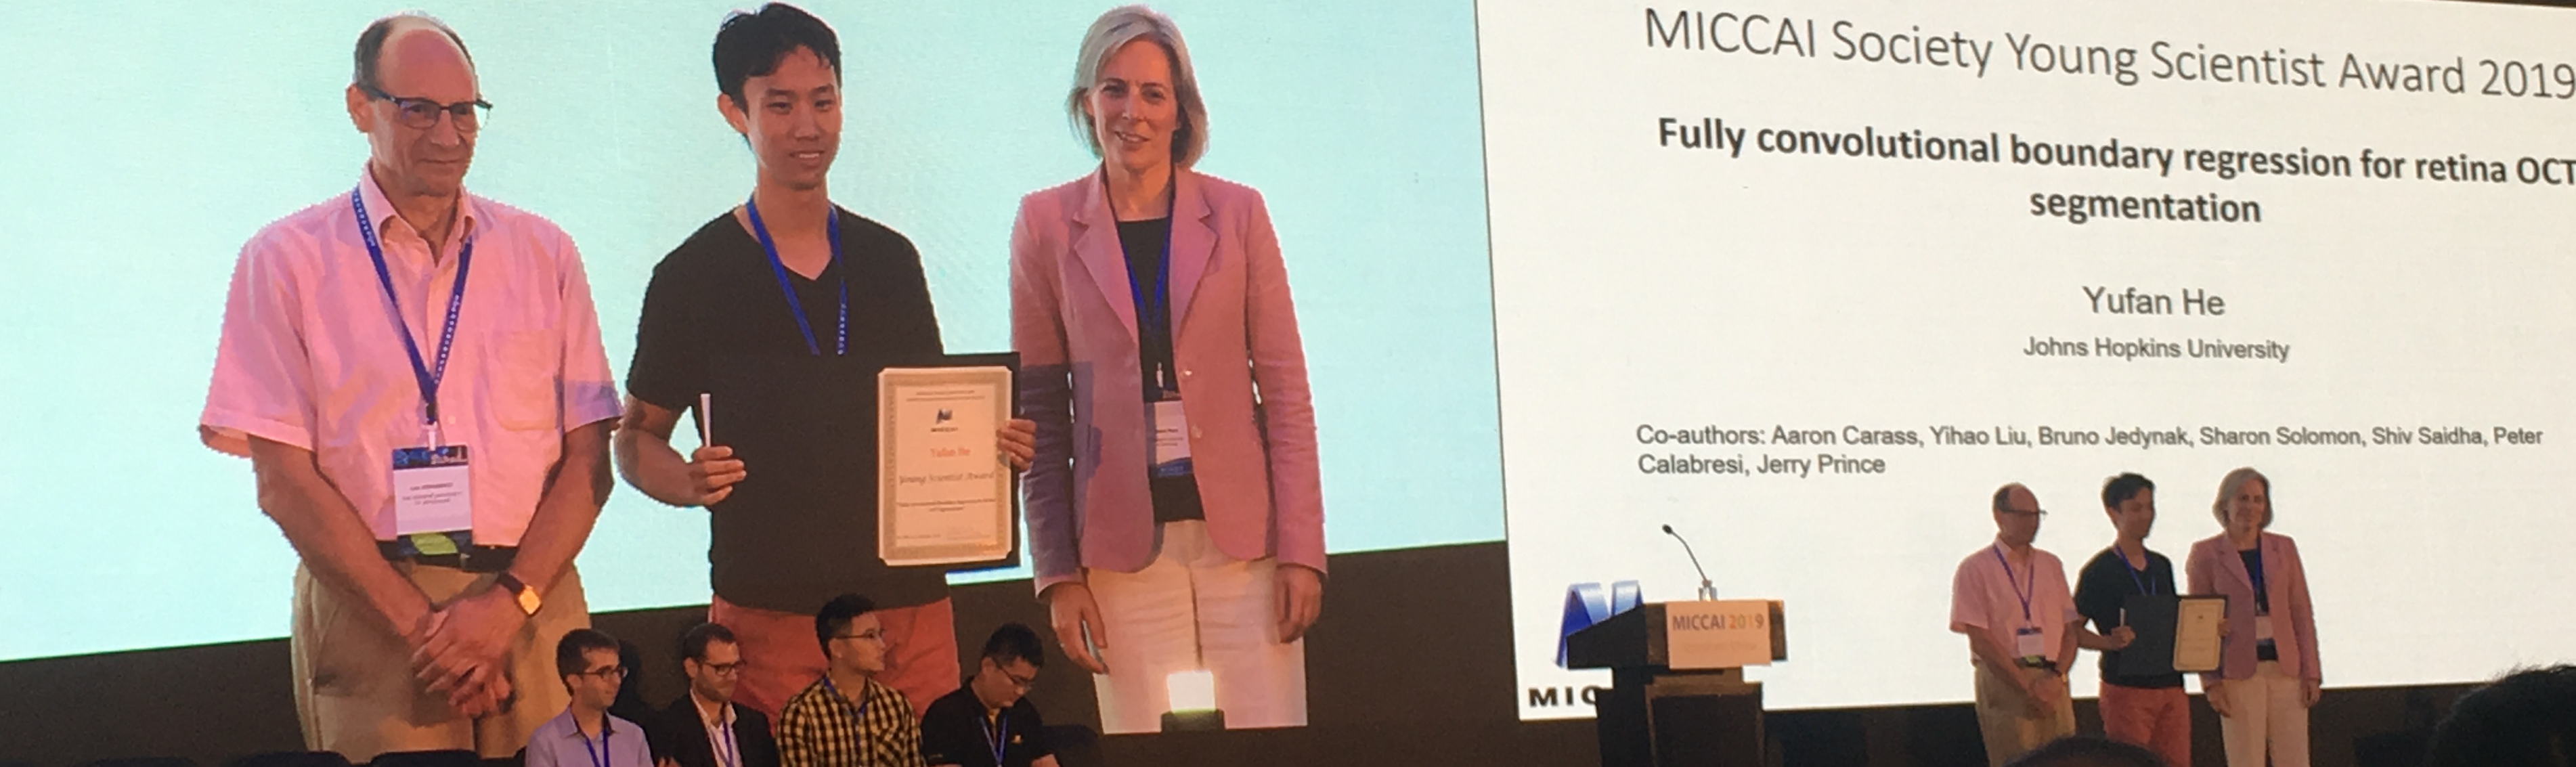 Yufan He wins a MICCAI Young Scientist Award for his paper titled "Fully convolutional boundary regression for retina OCT segmentation".